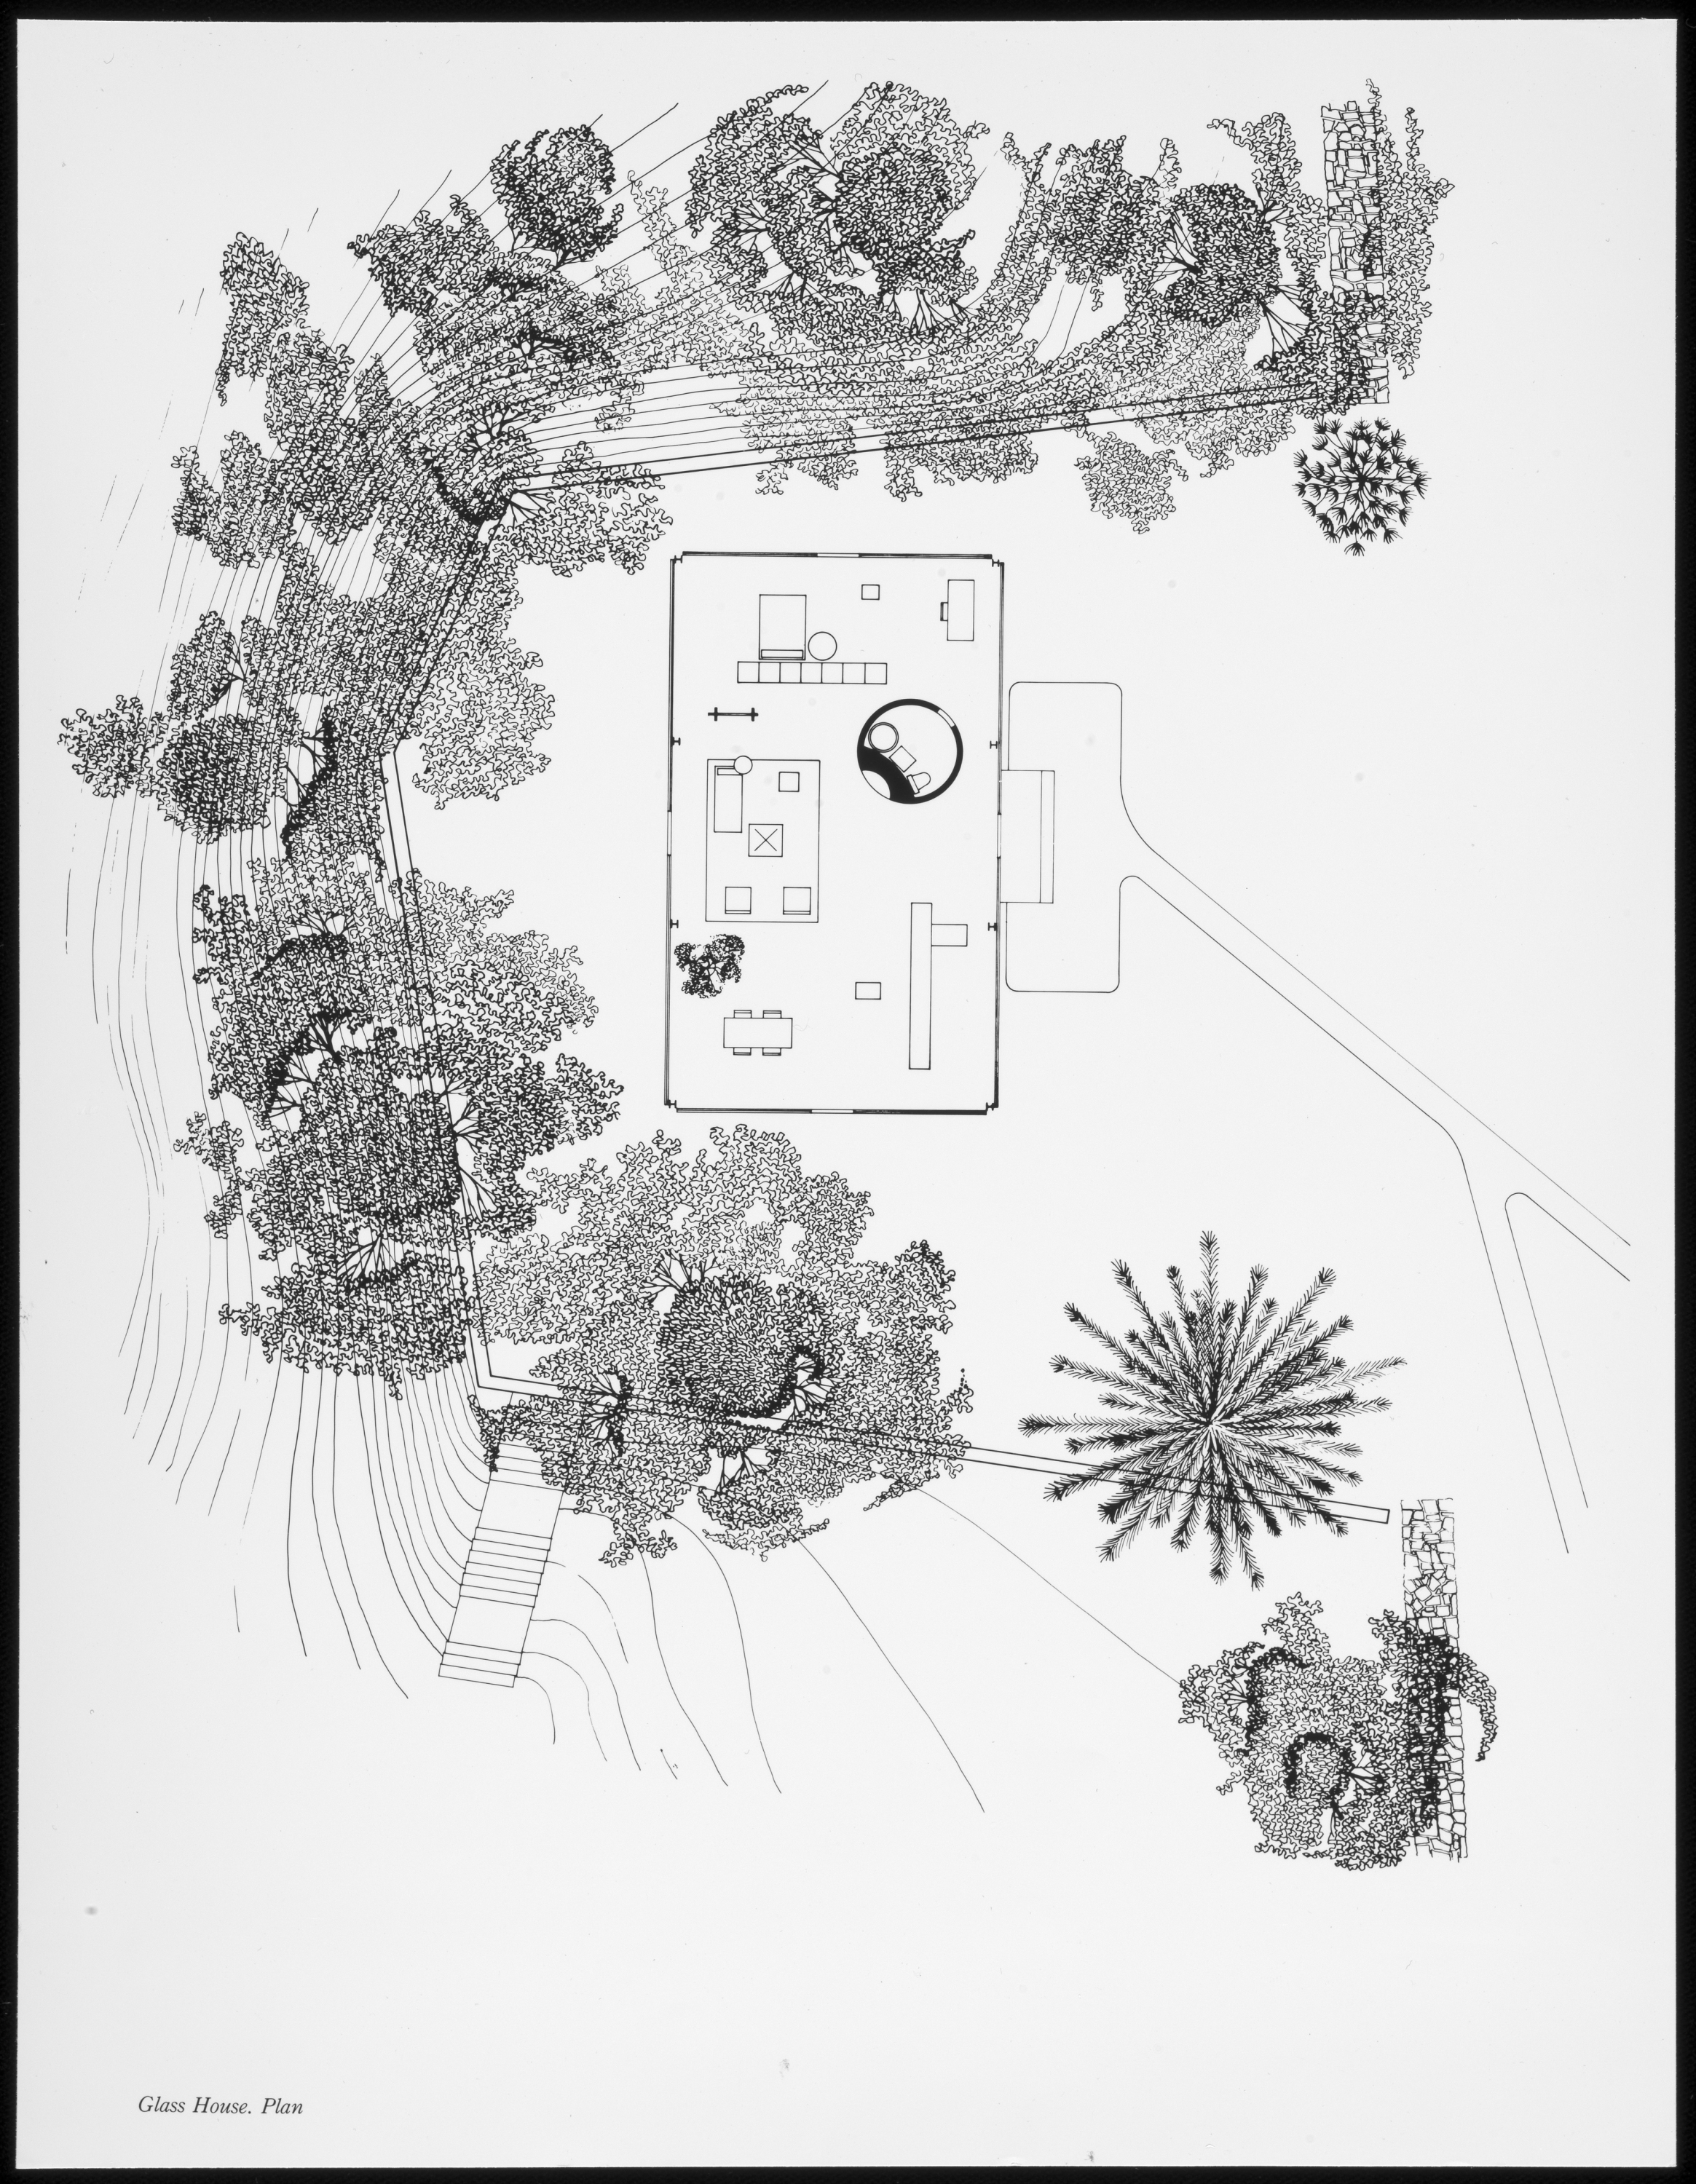 Plan of the Glass House